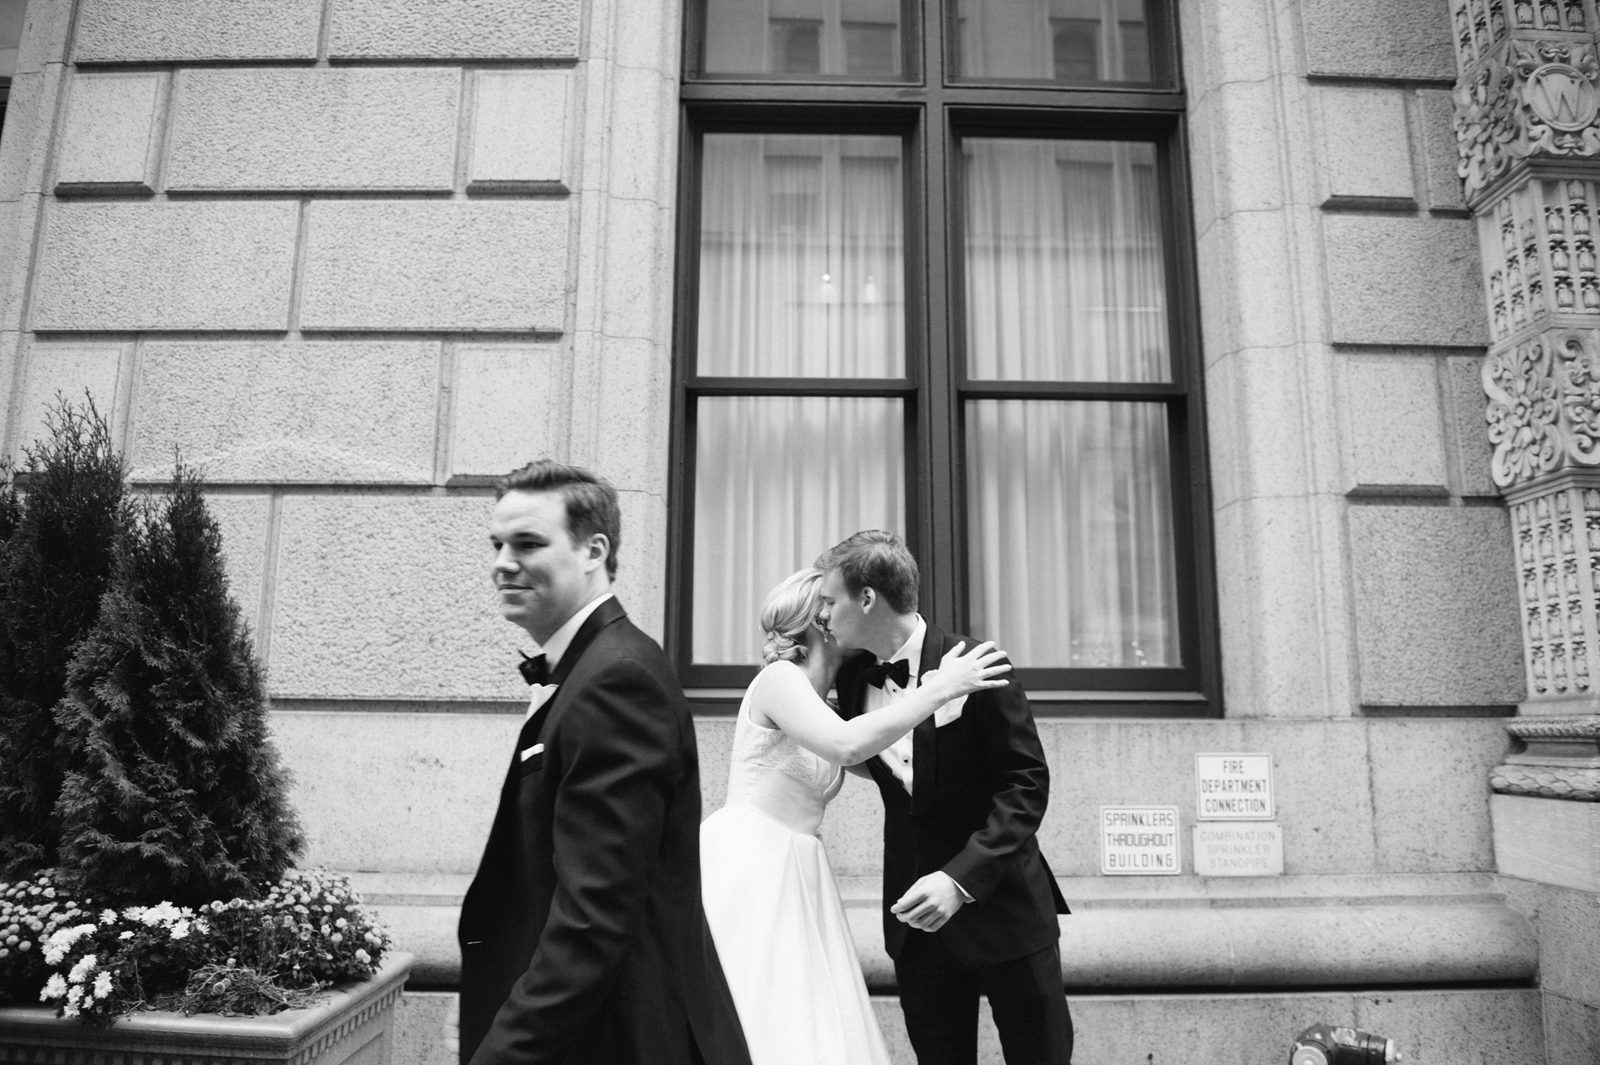 Bride and groom kissing and a man passing by